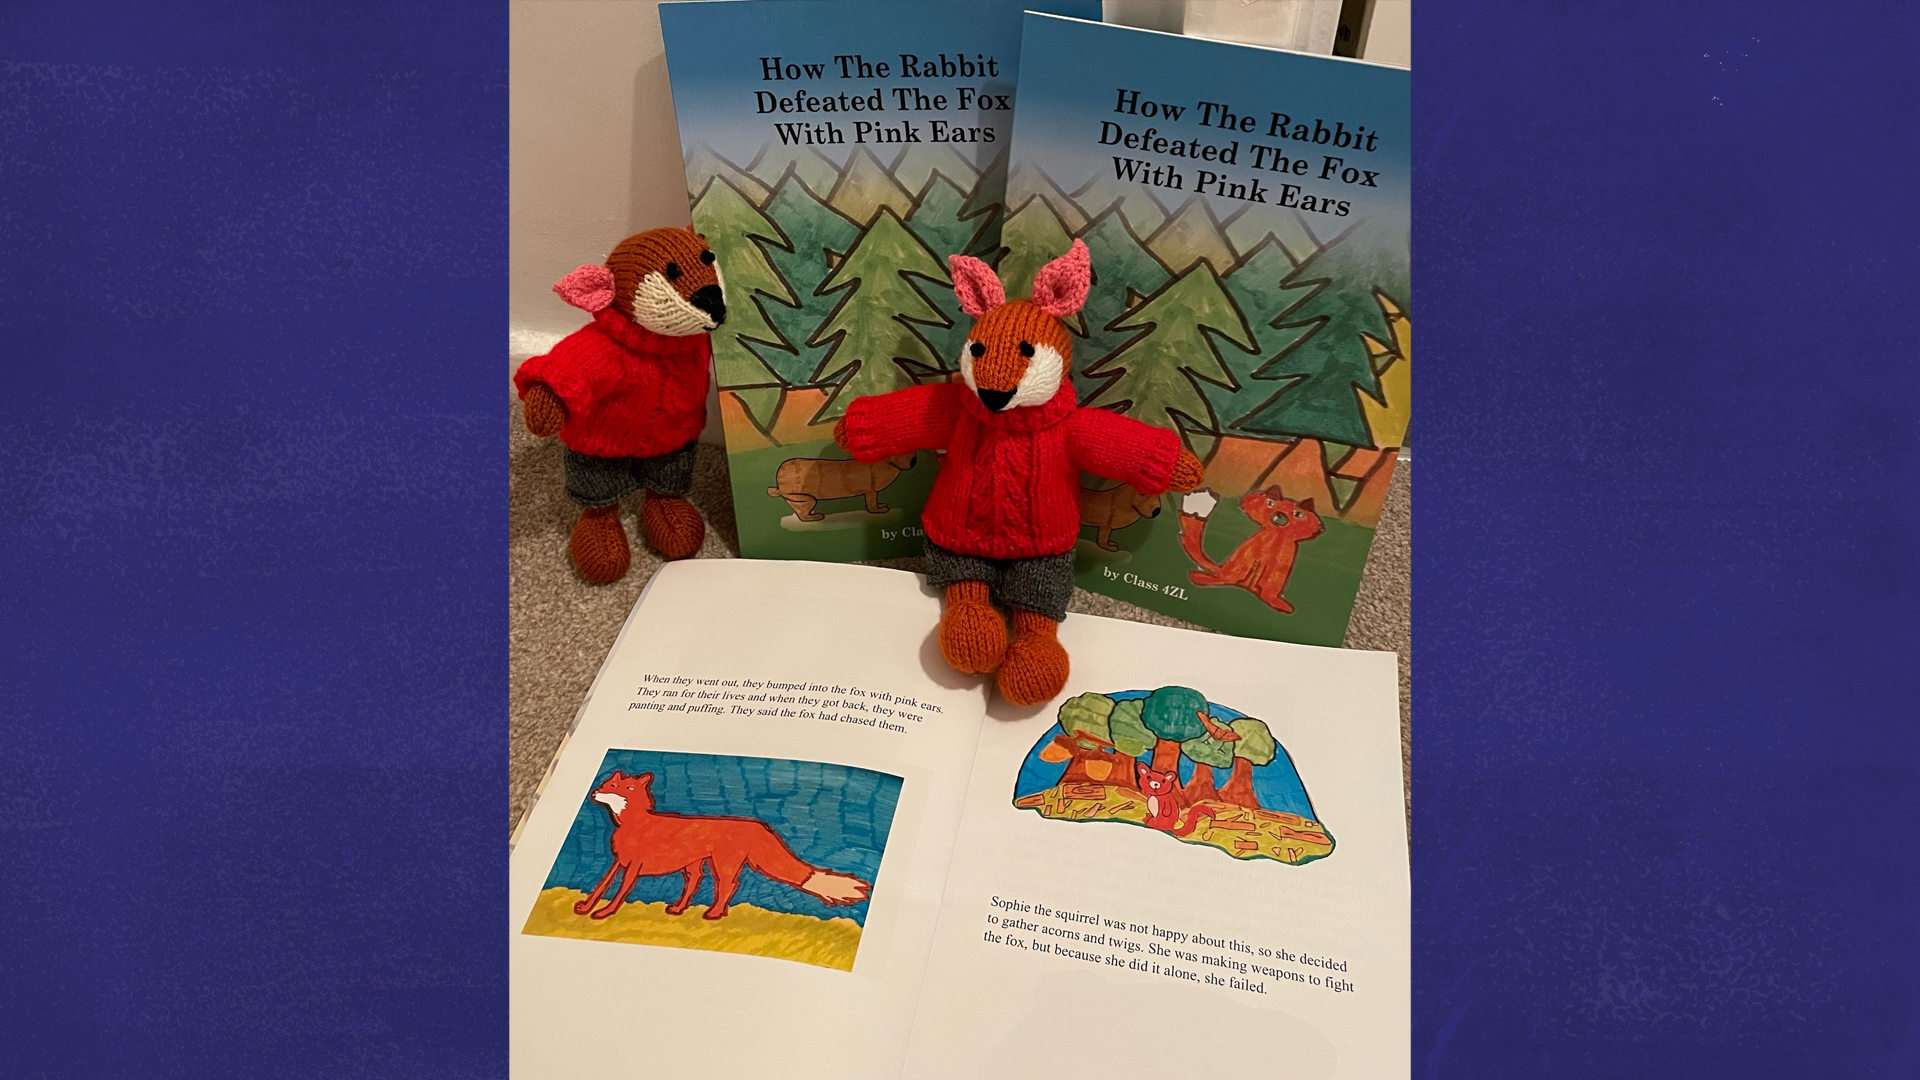 Class 6CJ's book open with two toy foxes in front of it.